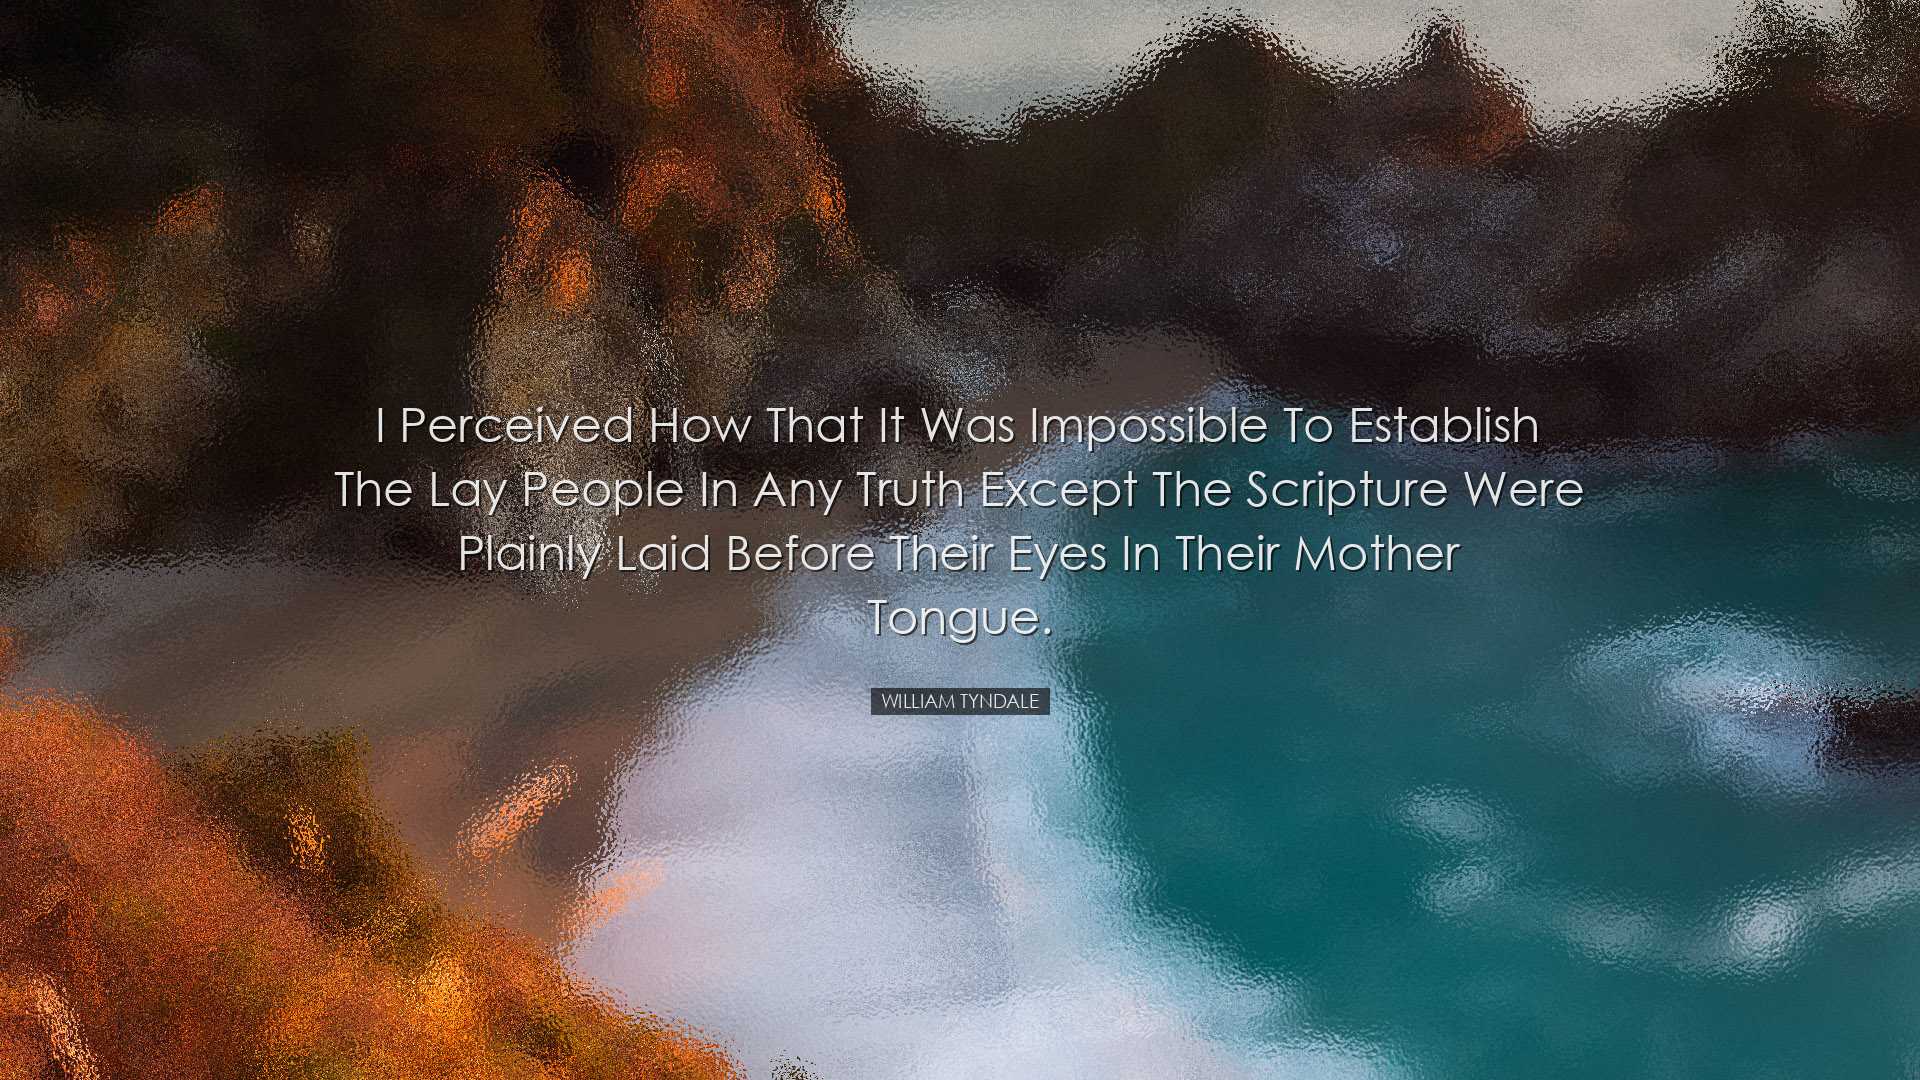 I perceived how that it was impossible to establish the lay people